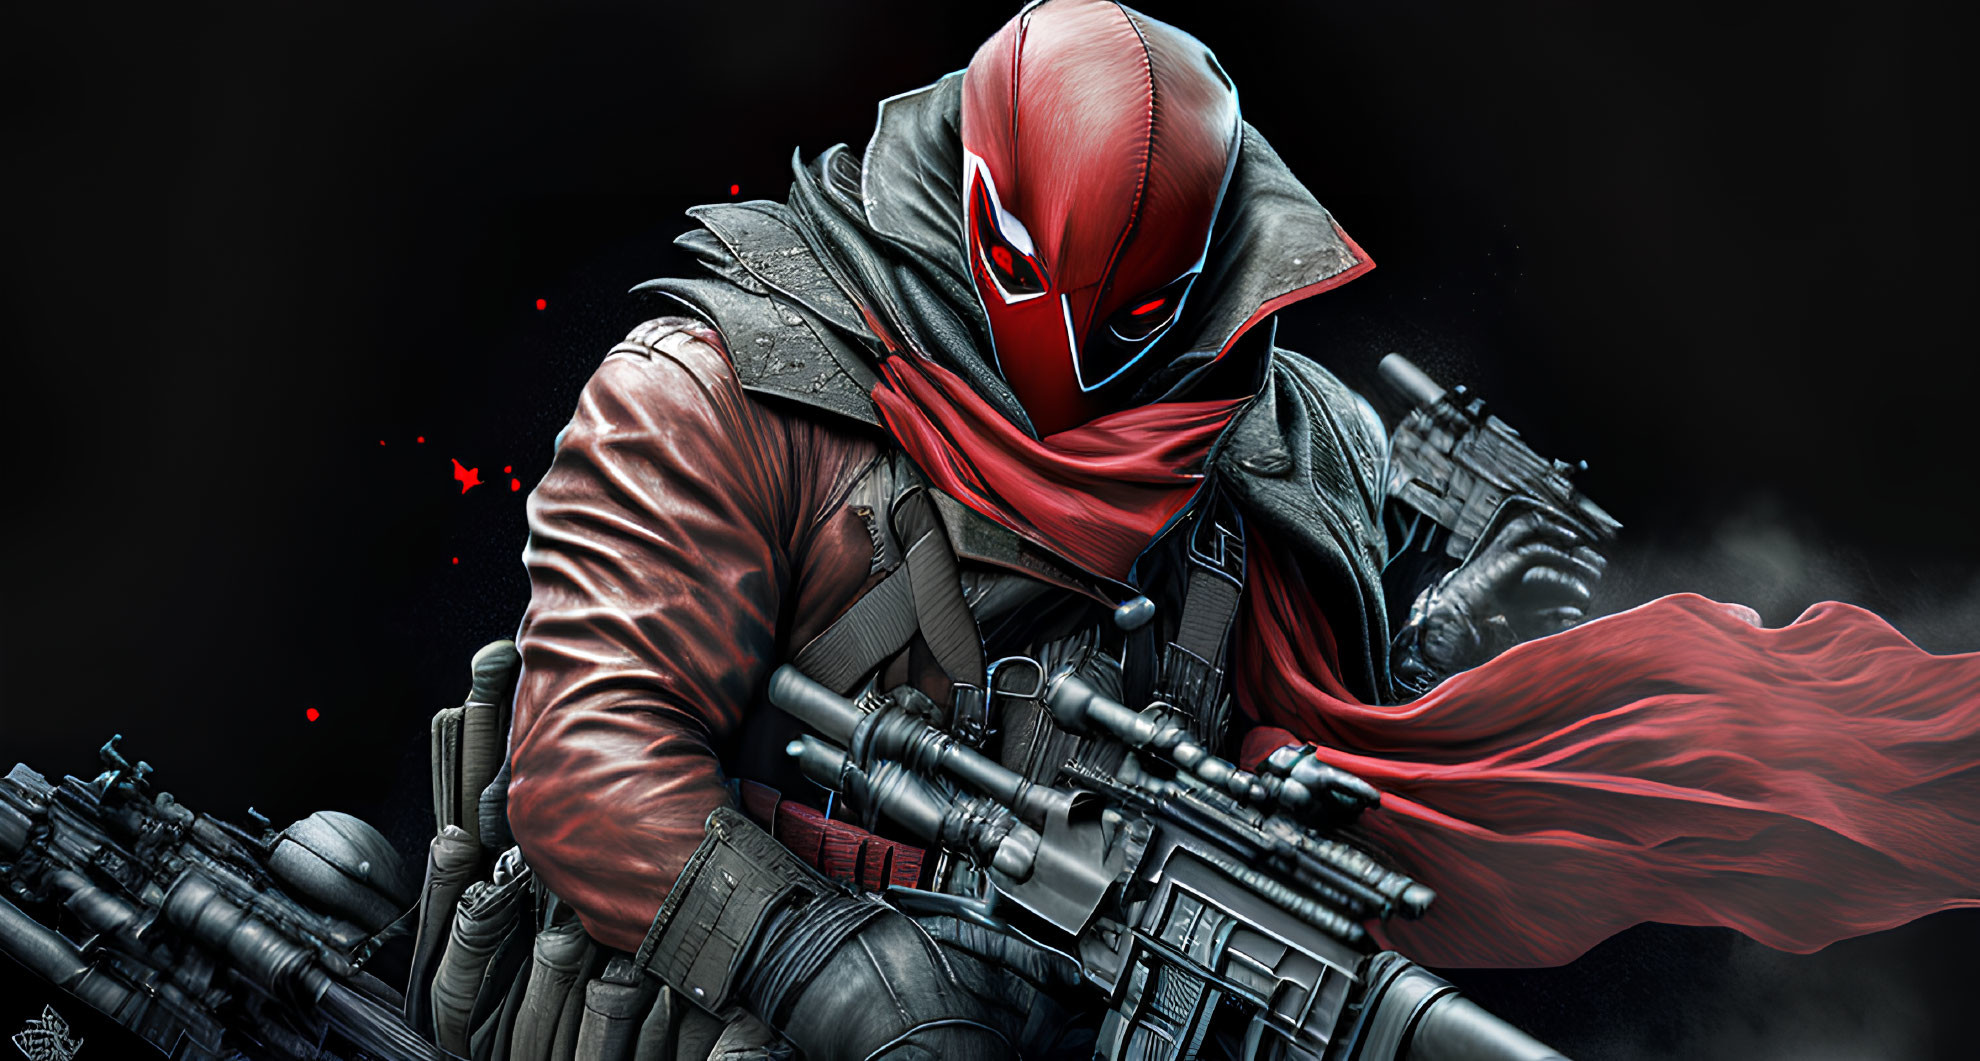 Masked Figure in Red and Black Armor with Futuristic Weapon on Dark Background